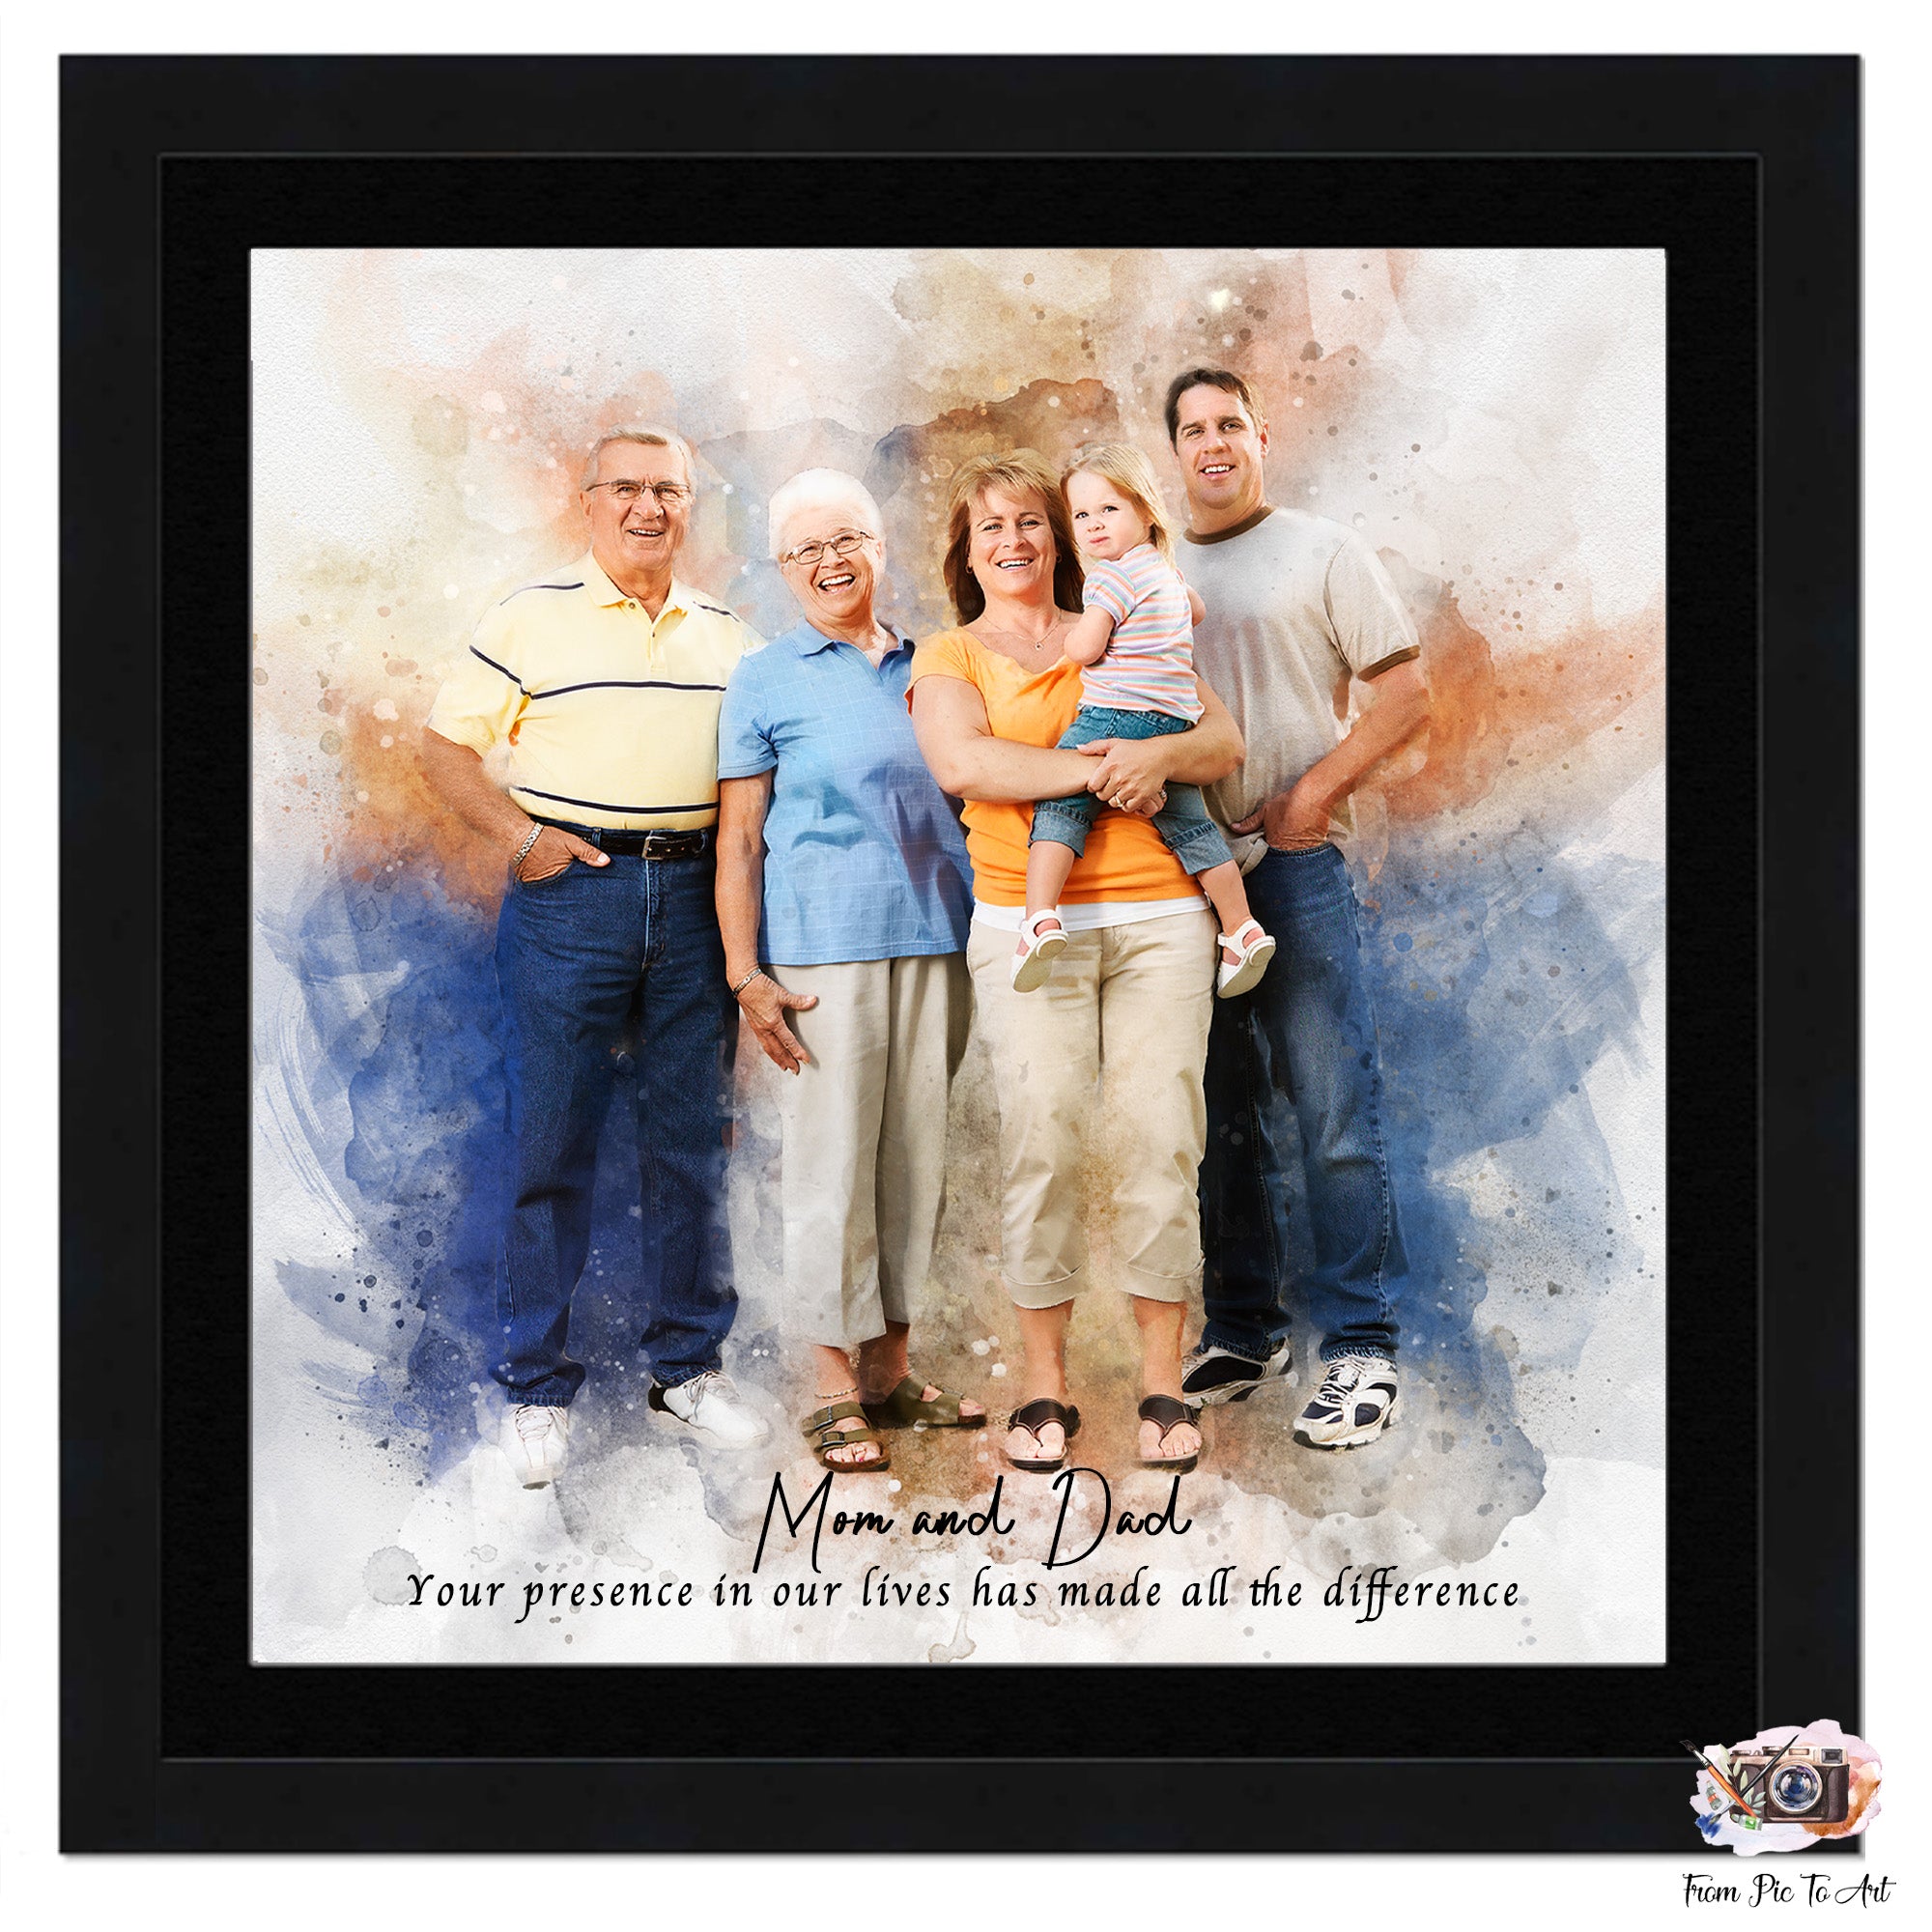 Family_portrait-_grandparents_and_parents_holding_children_accompanied_by_a_heartfelt_thank-you_note, FromPicToArt